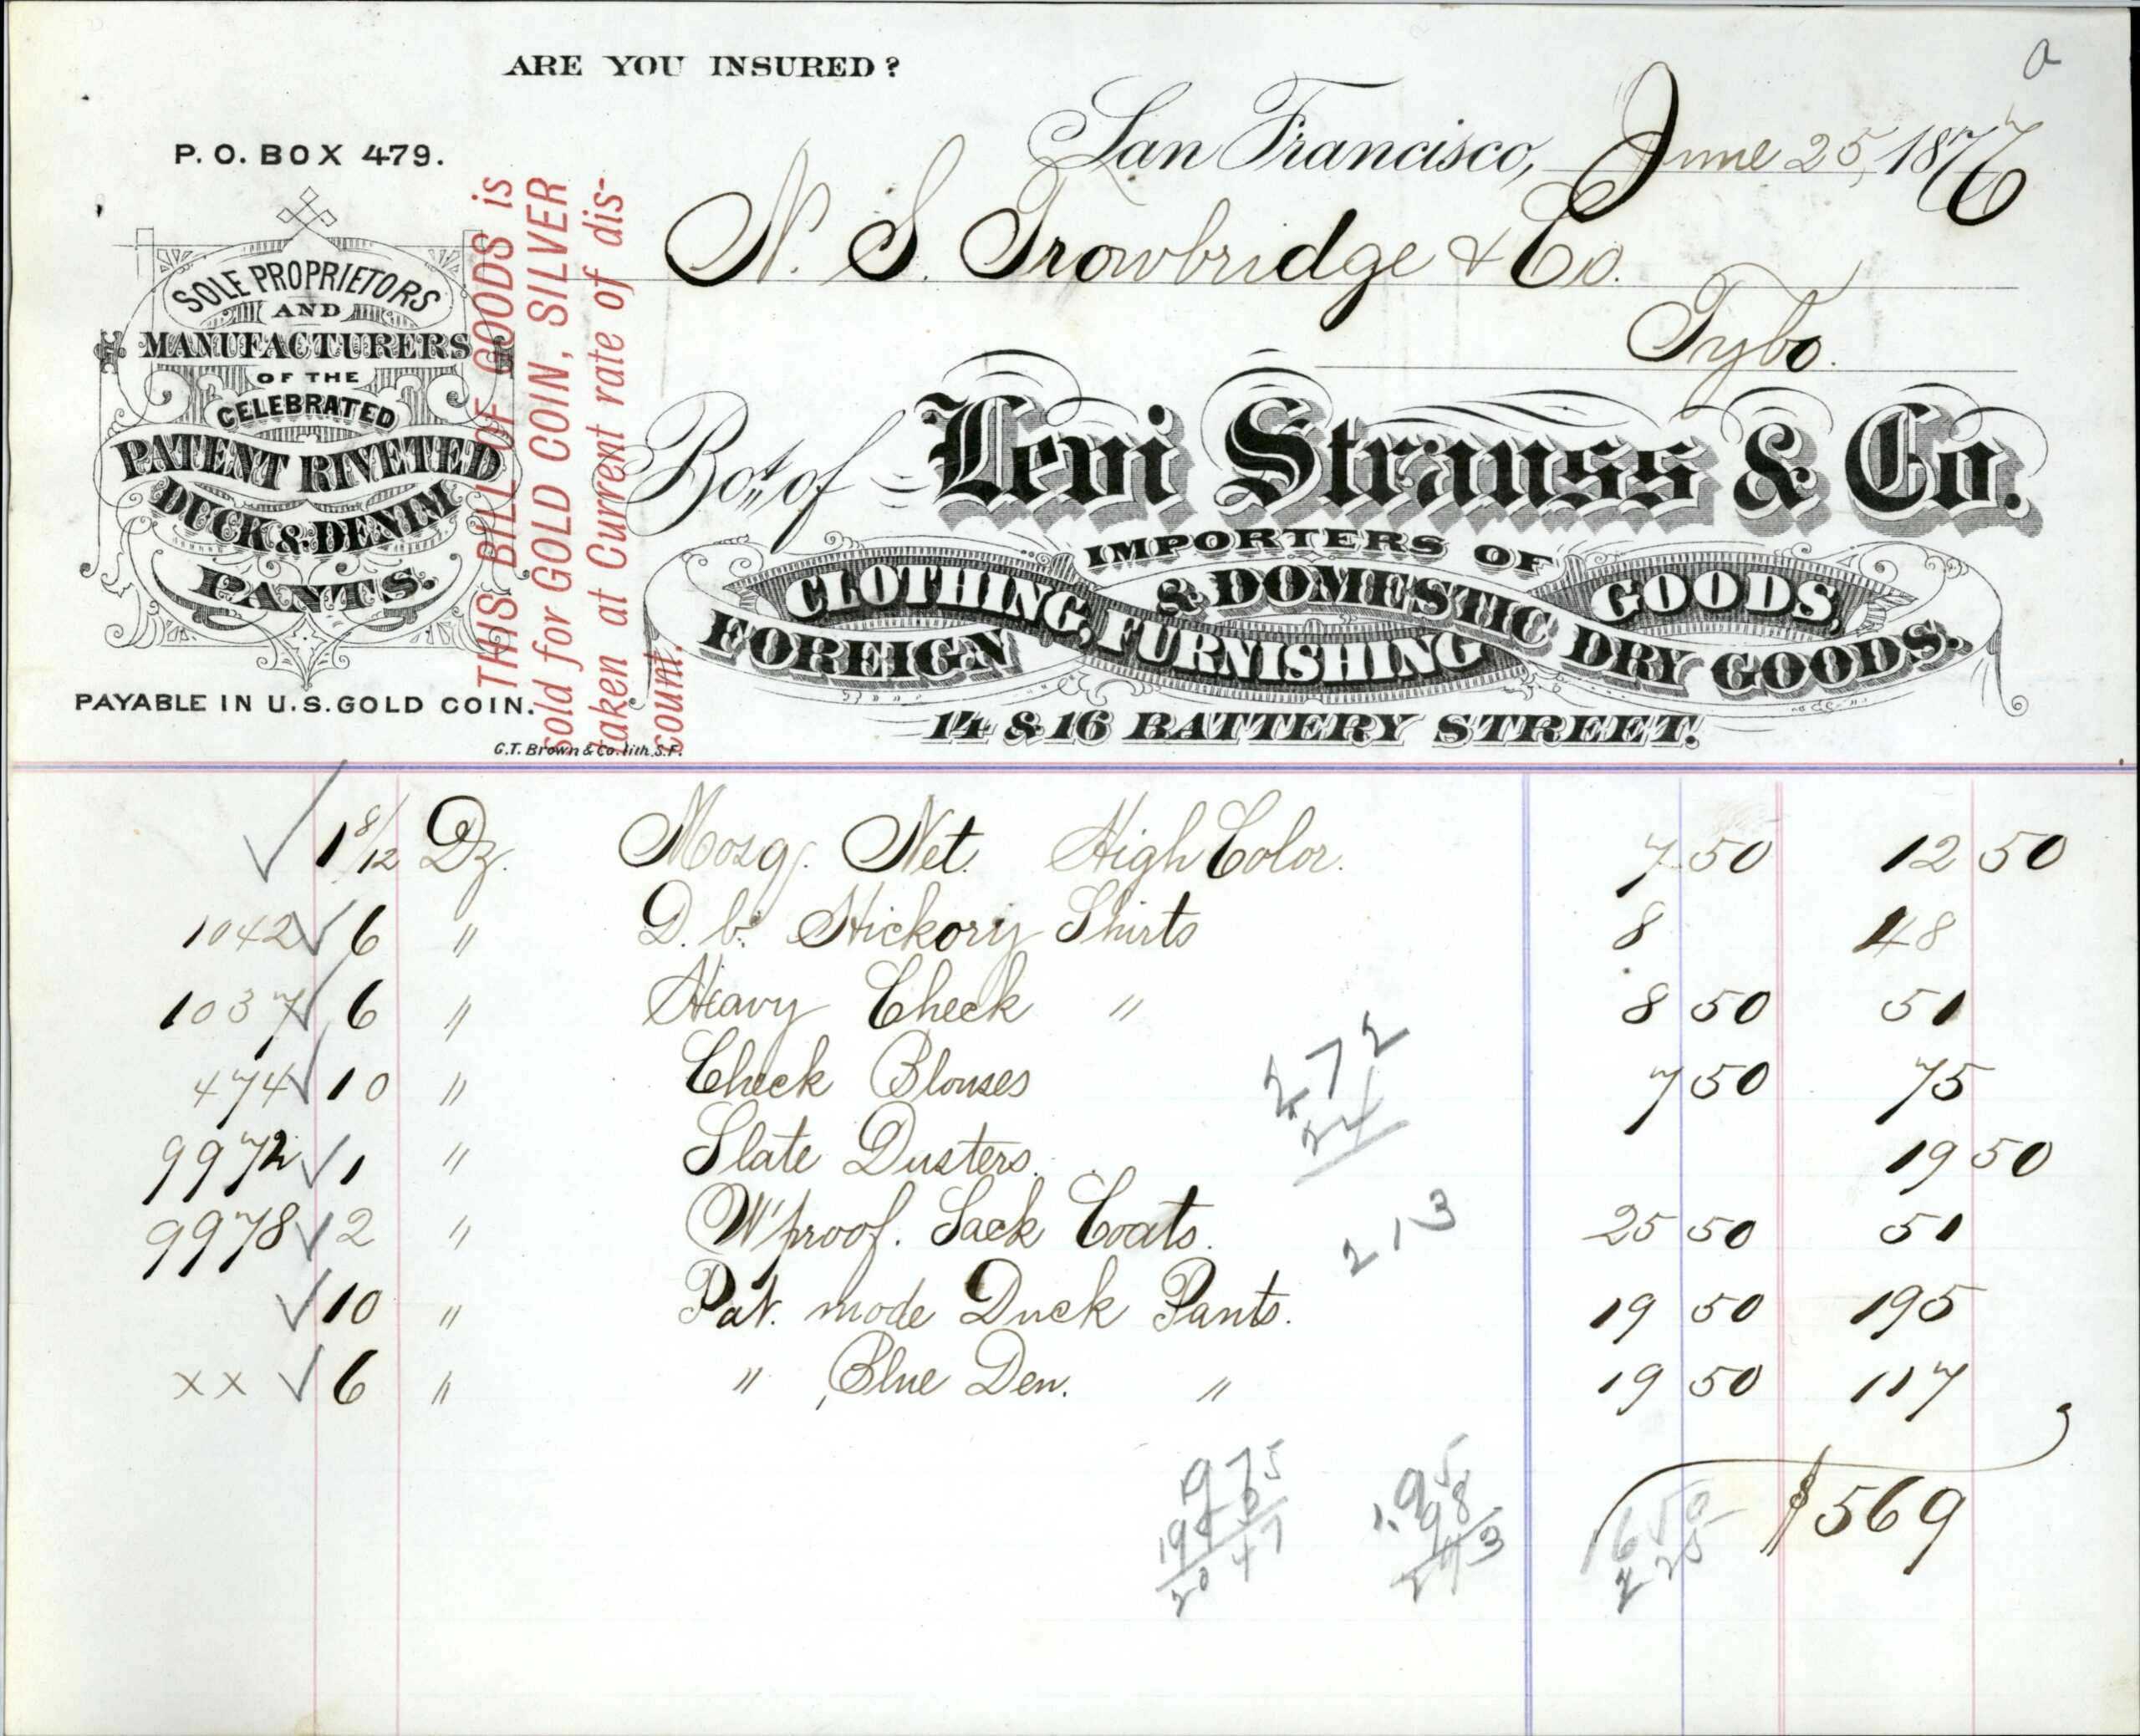 LS&Co. invoice from late 1800s featuring lithographic logo designed by Grafton Tyler Brown